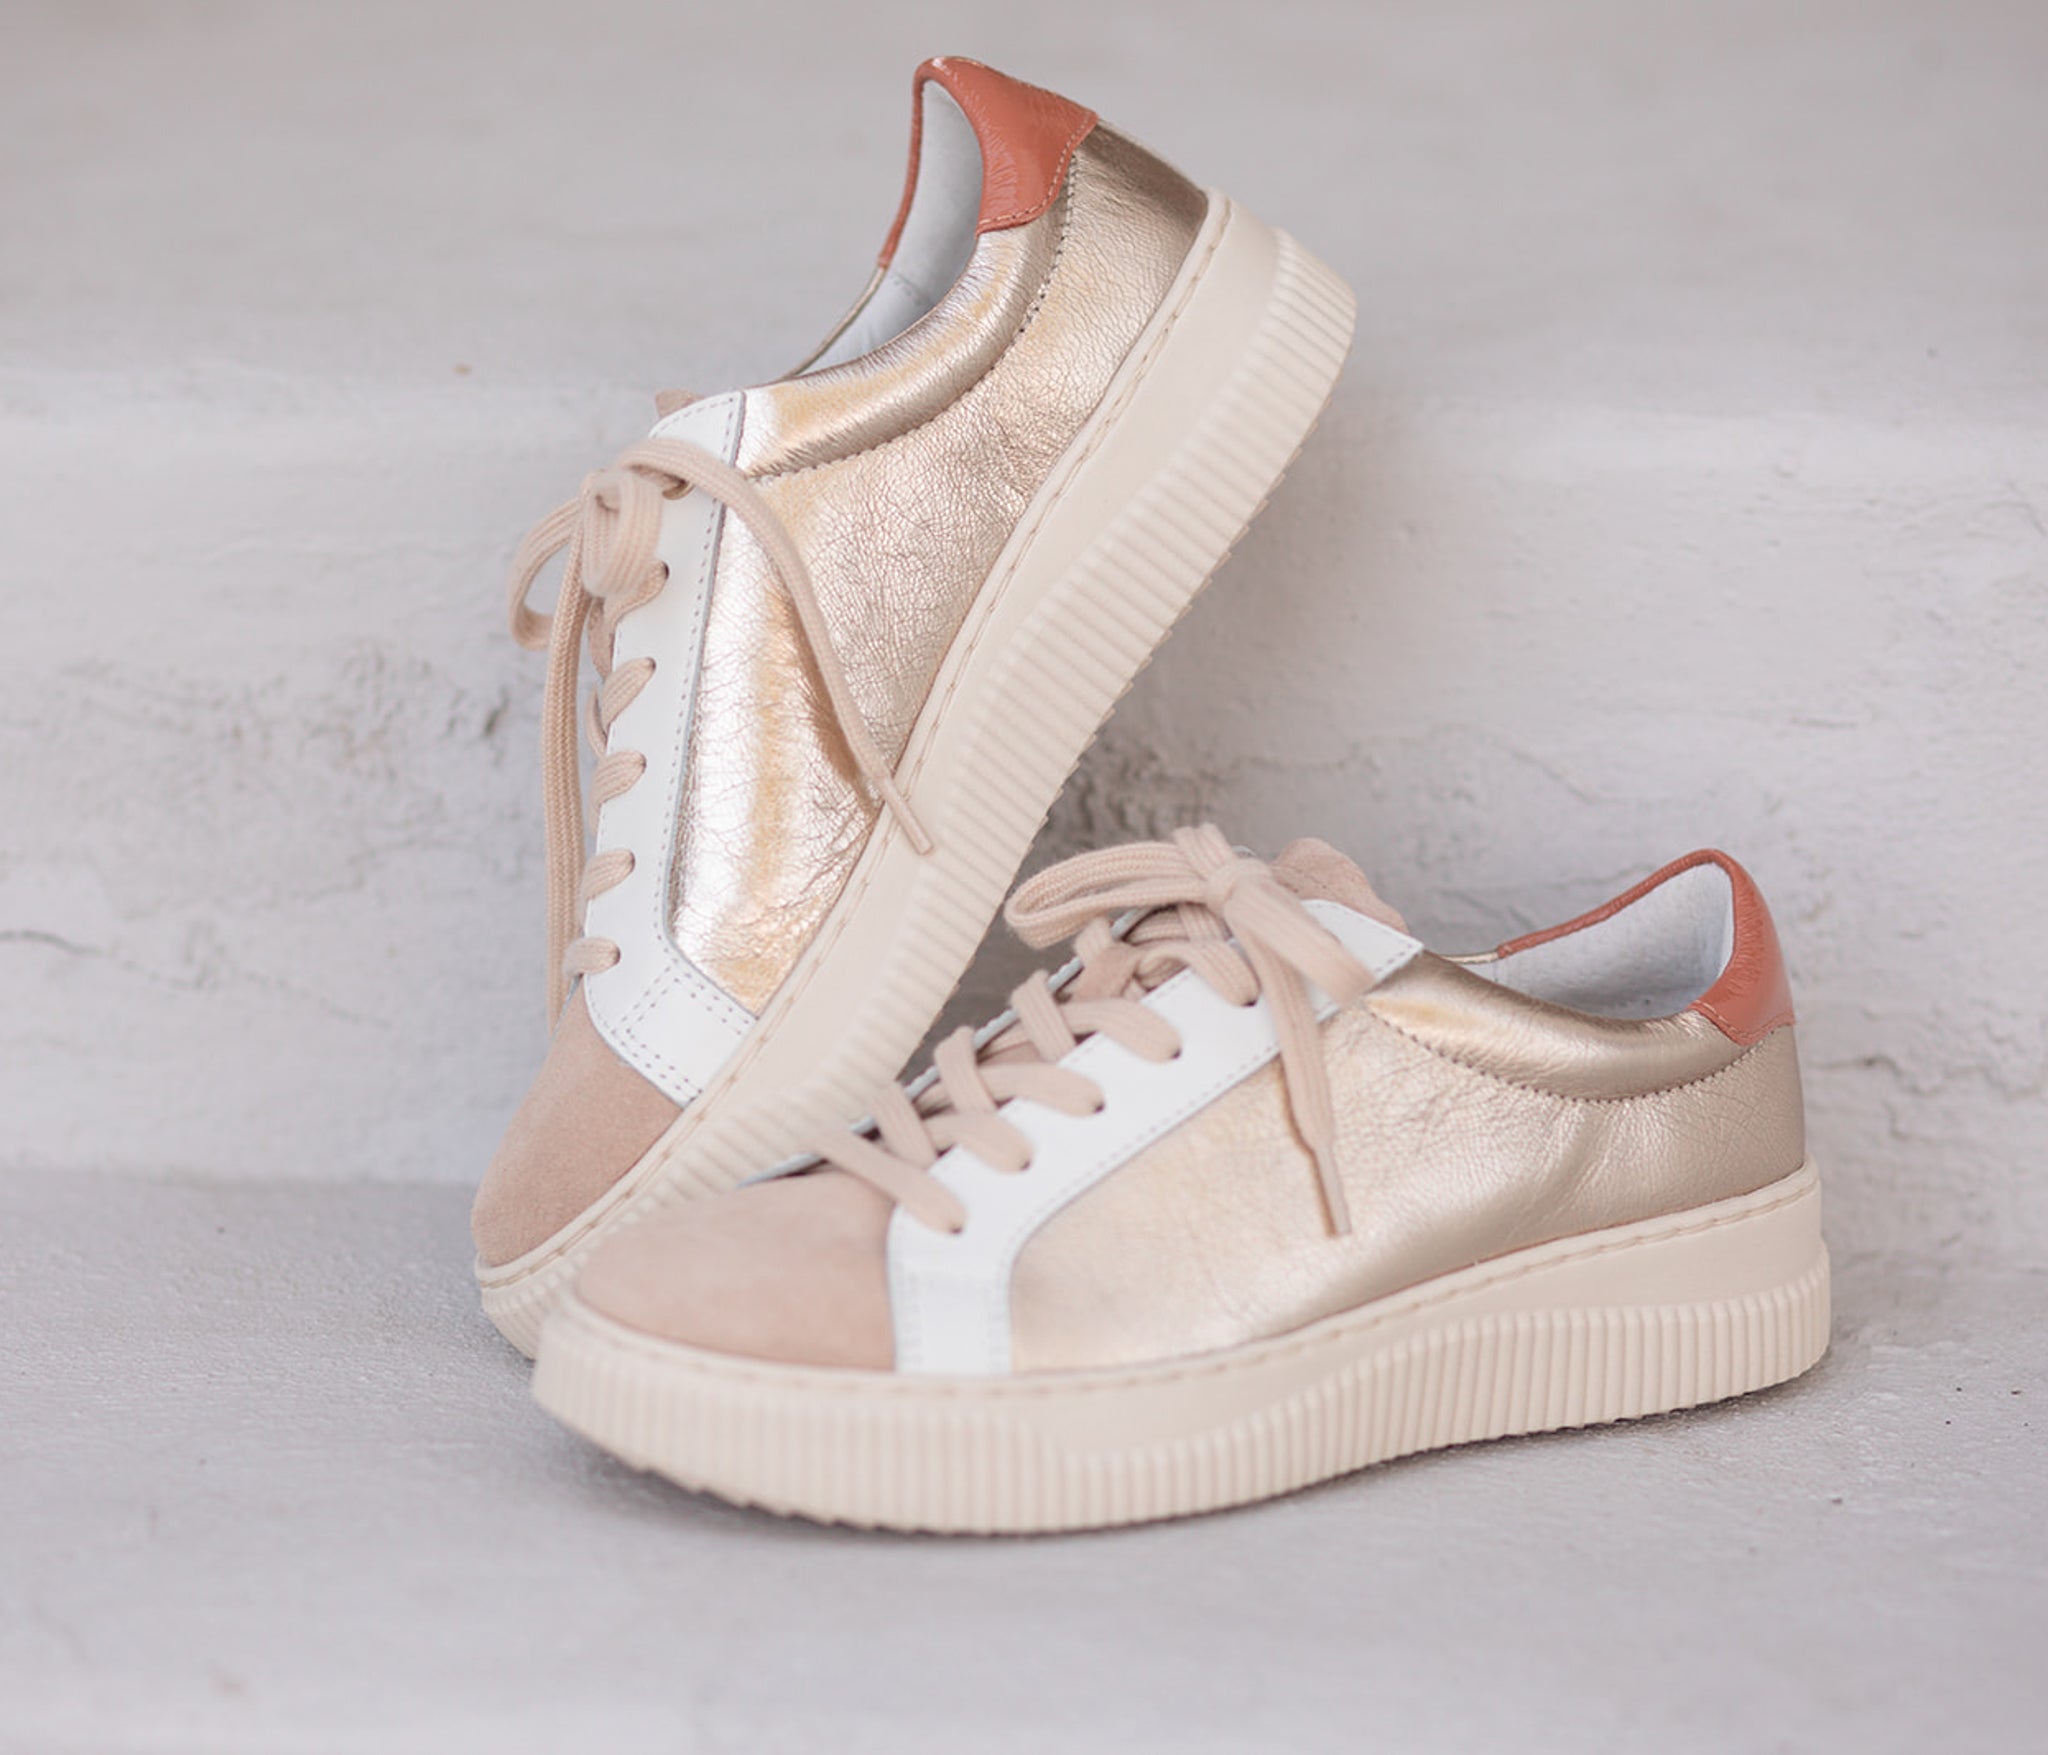 Platino Fianna Leather Sneakers in White and Cream by Sofft Shoes